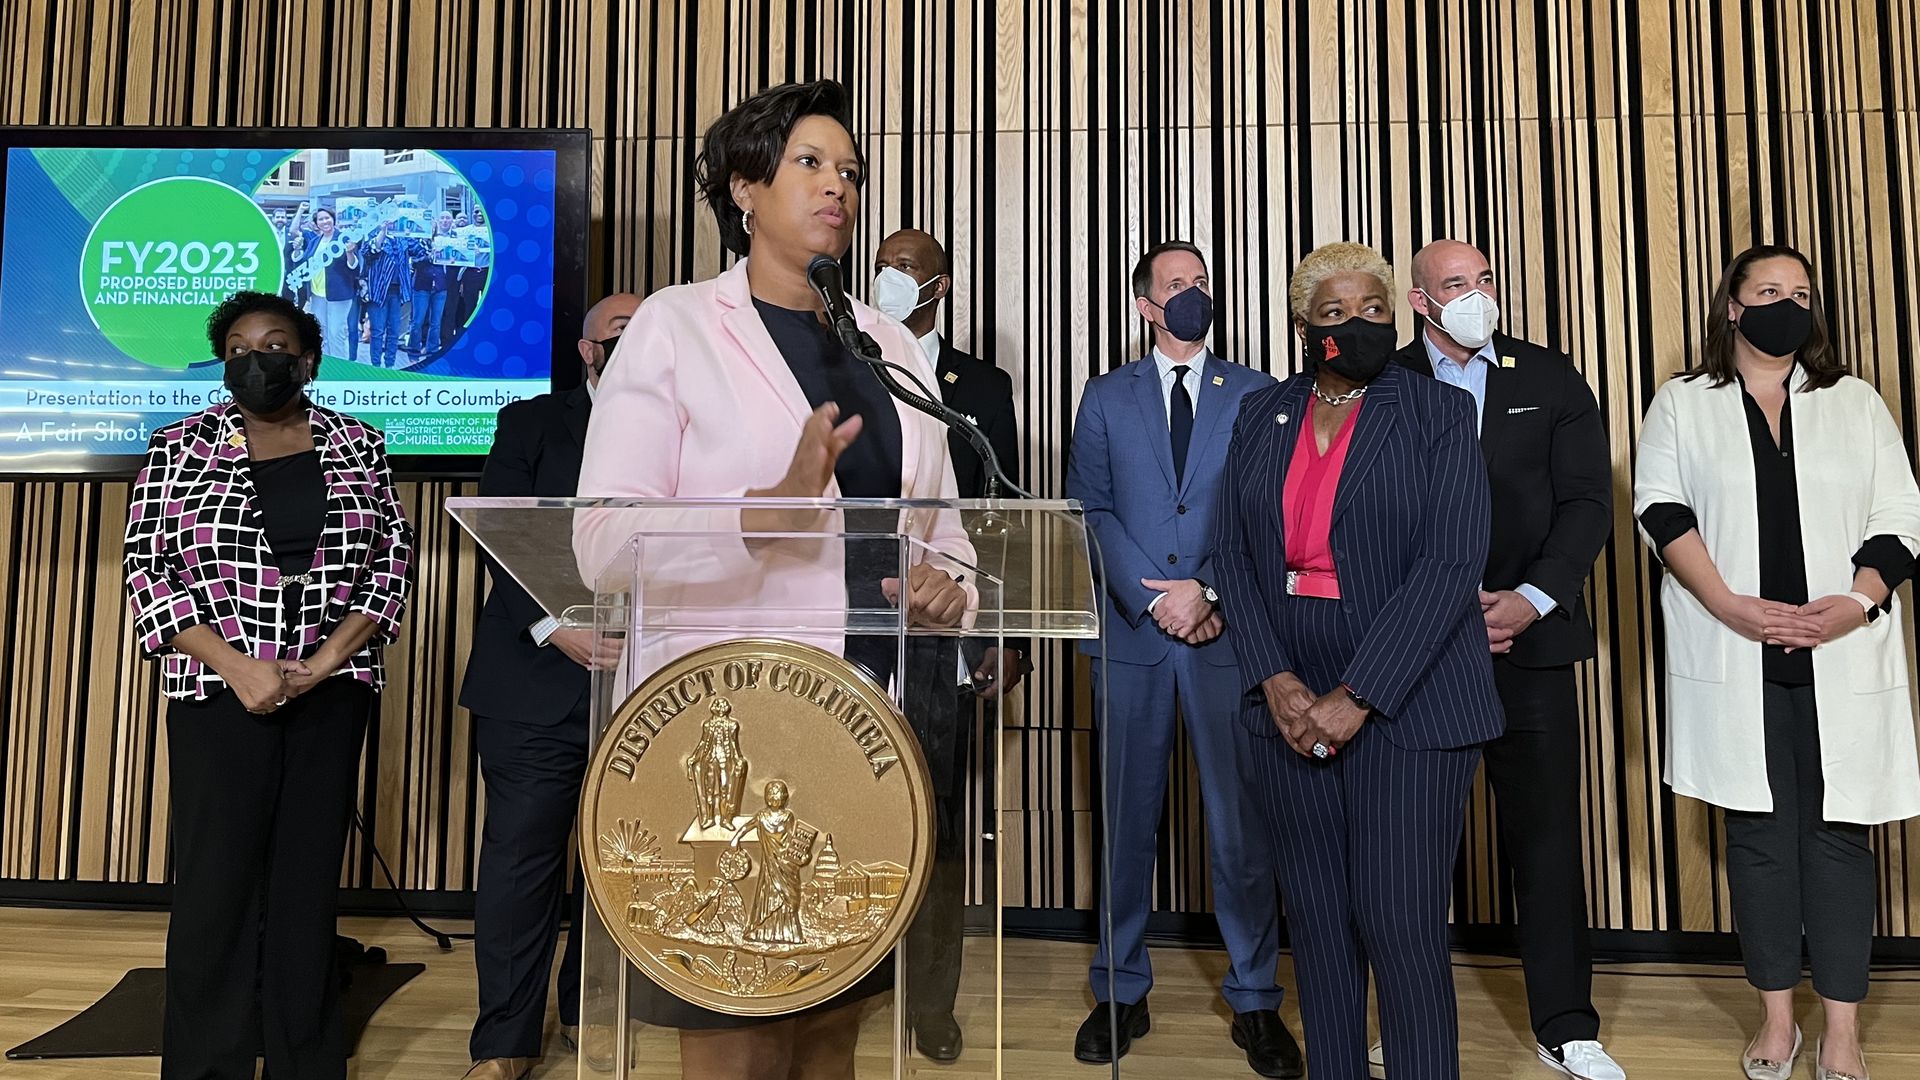 Mayor Muriel Bowser stands before a podium with her cabinet behind her